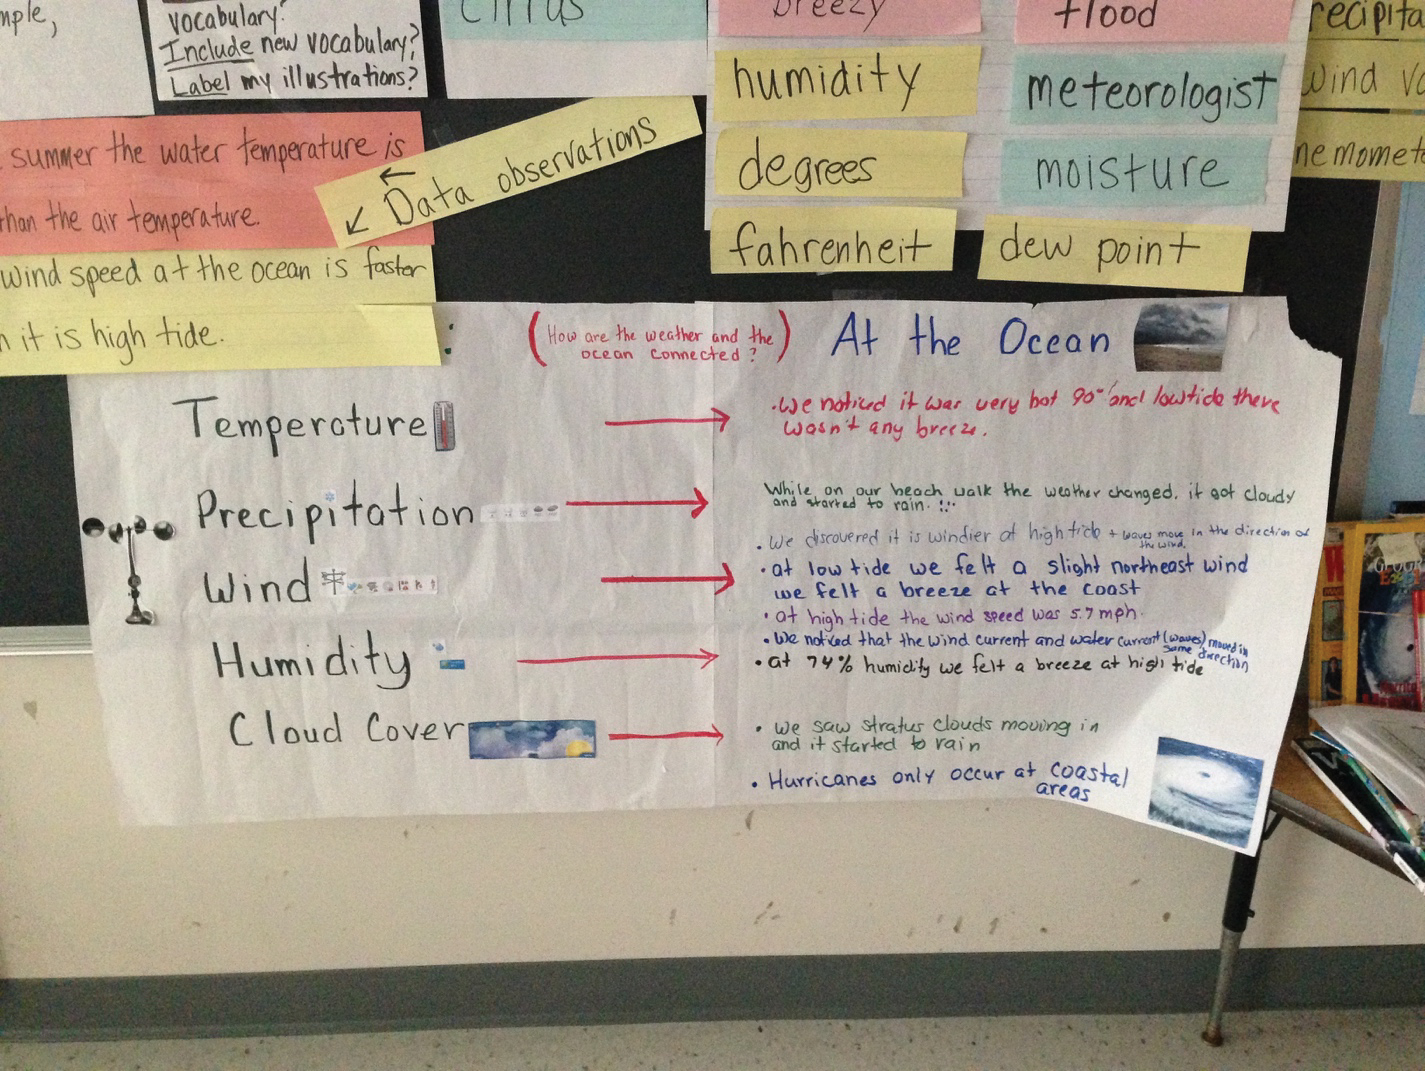 Students describe their observations of the ocean using the language of oceanography.